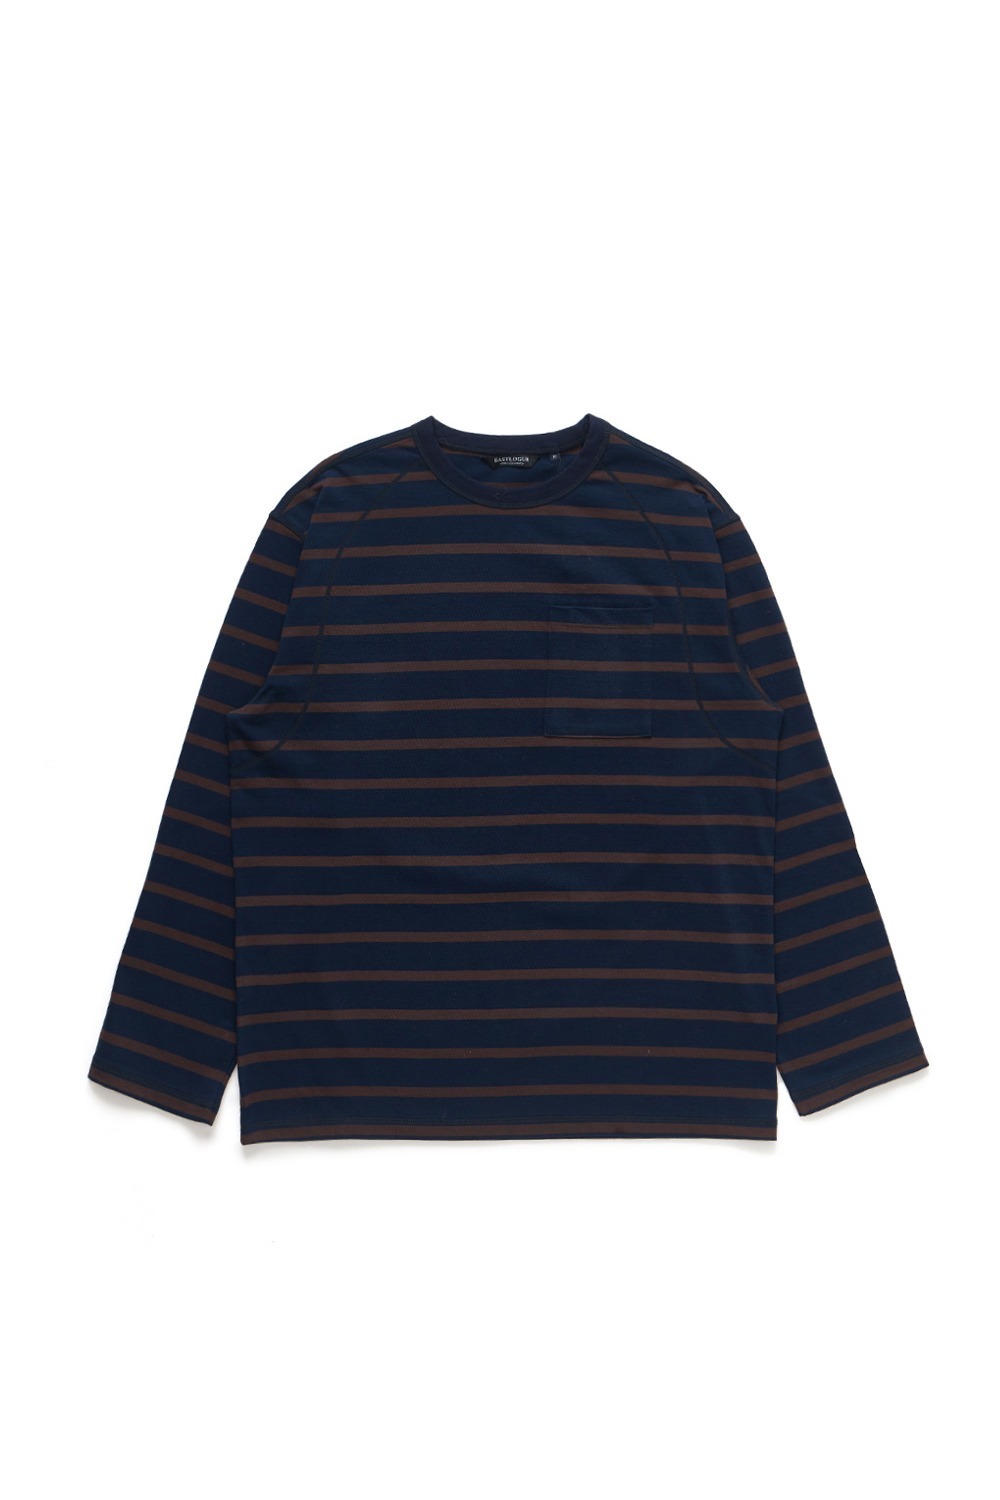 COVER STITCH T-SHIRTS / D.NAVY &amp; BROWN STRIPE